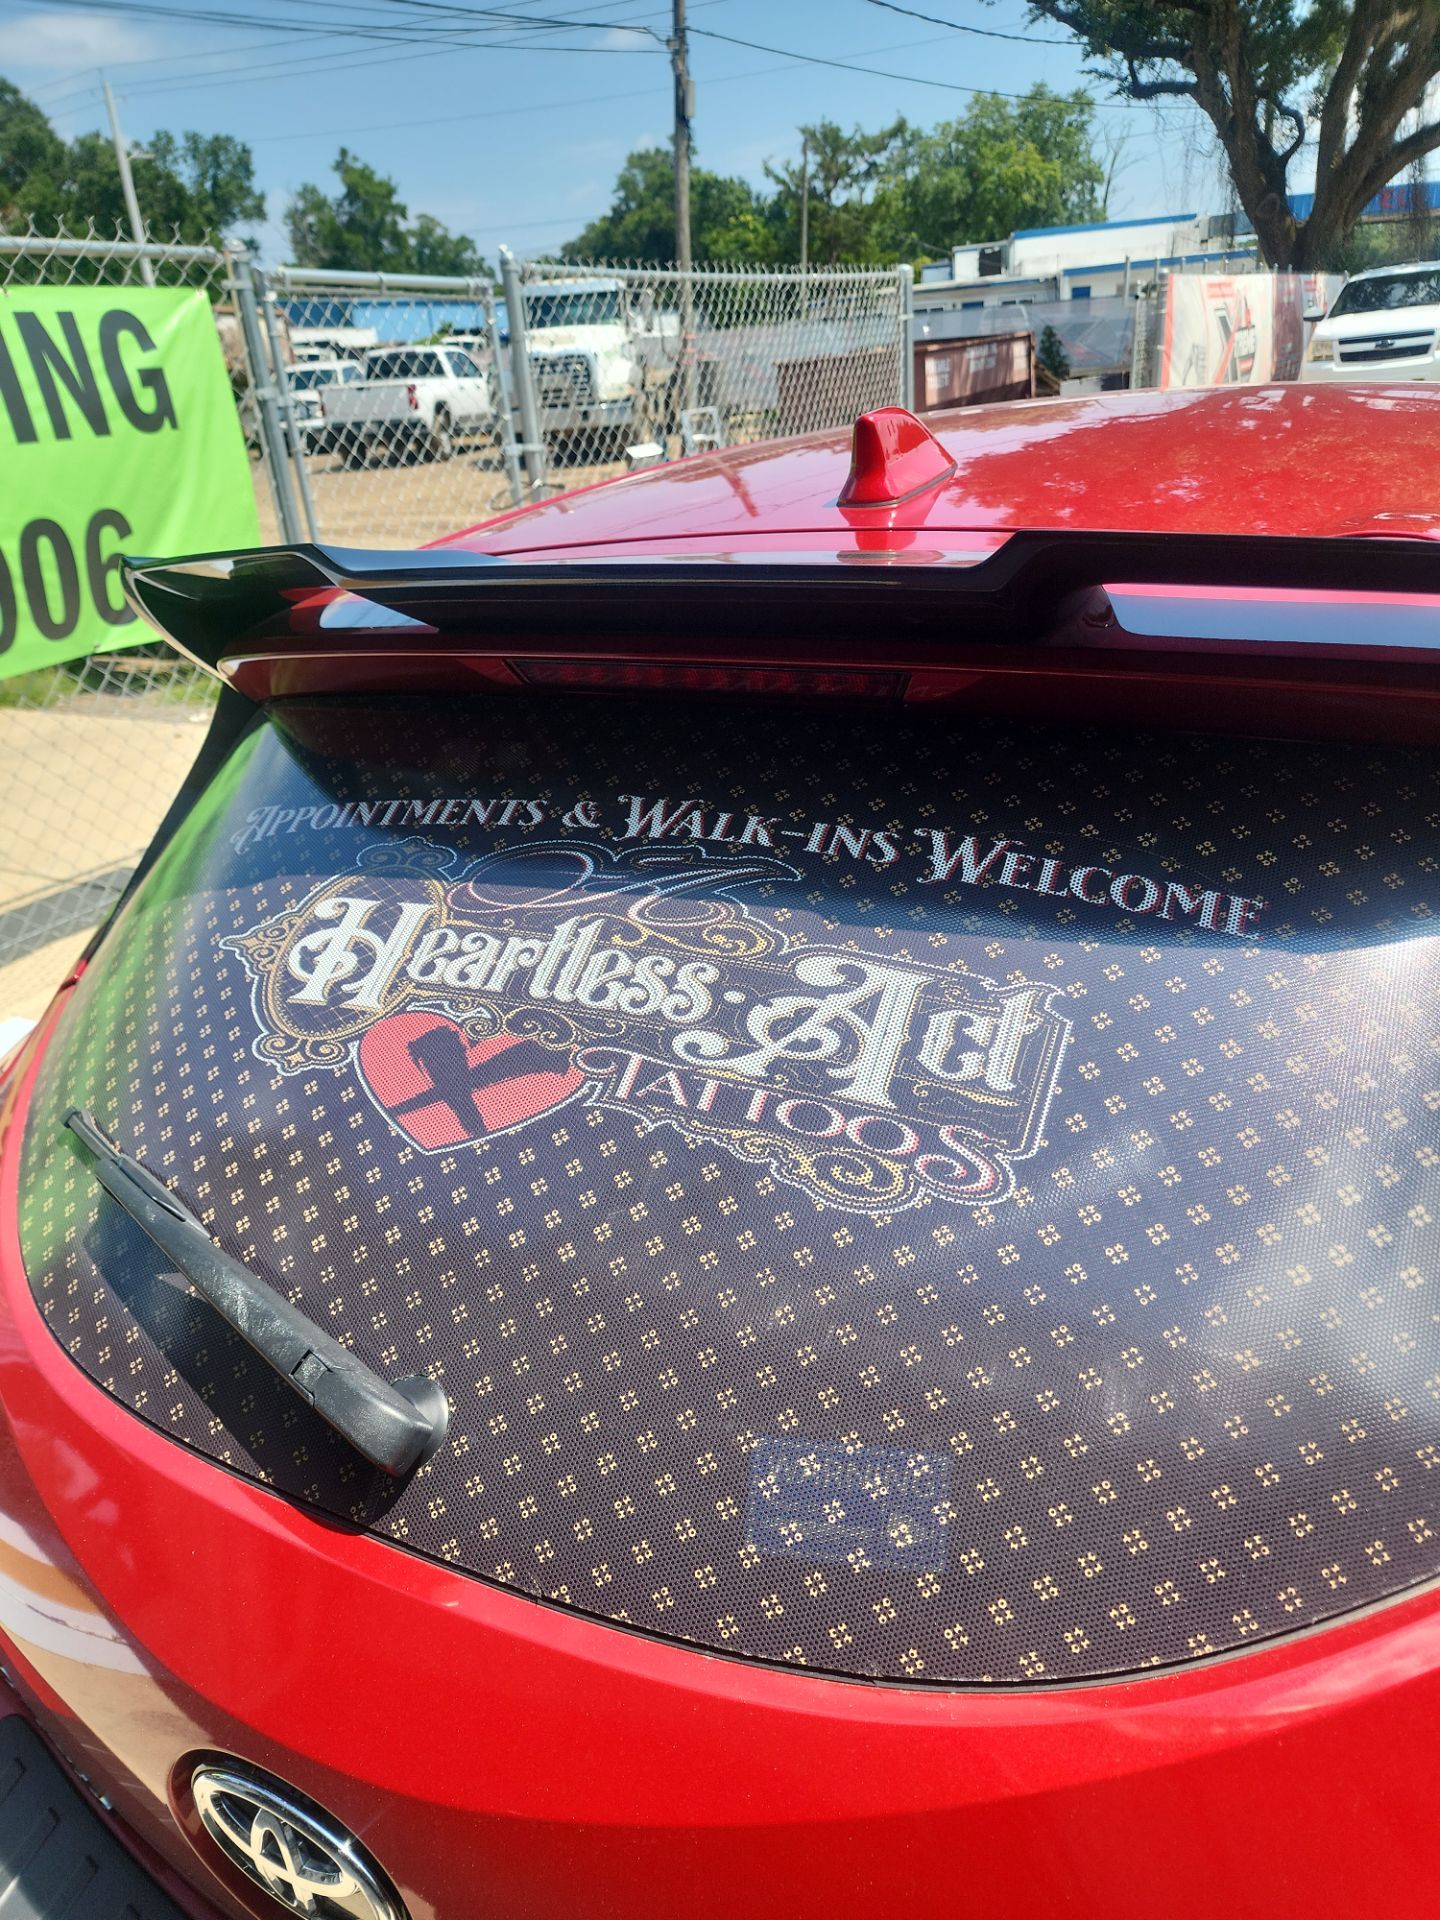 a window tinting company named t's window tinting based in pensacola fl is providing a service on a red car the service involves applying a custom vinyl or tint with printed advertisements on the rear window of the car the tint includes graphics and text promoting a tattoo shop